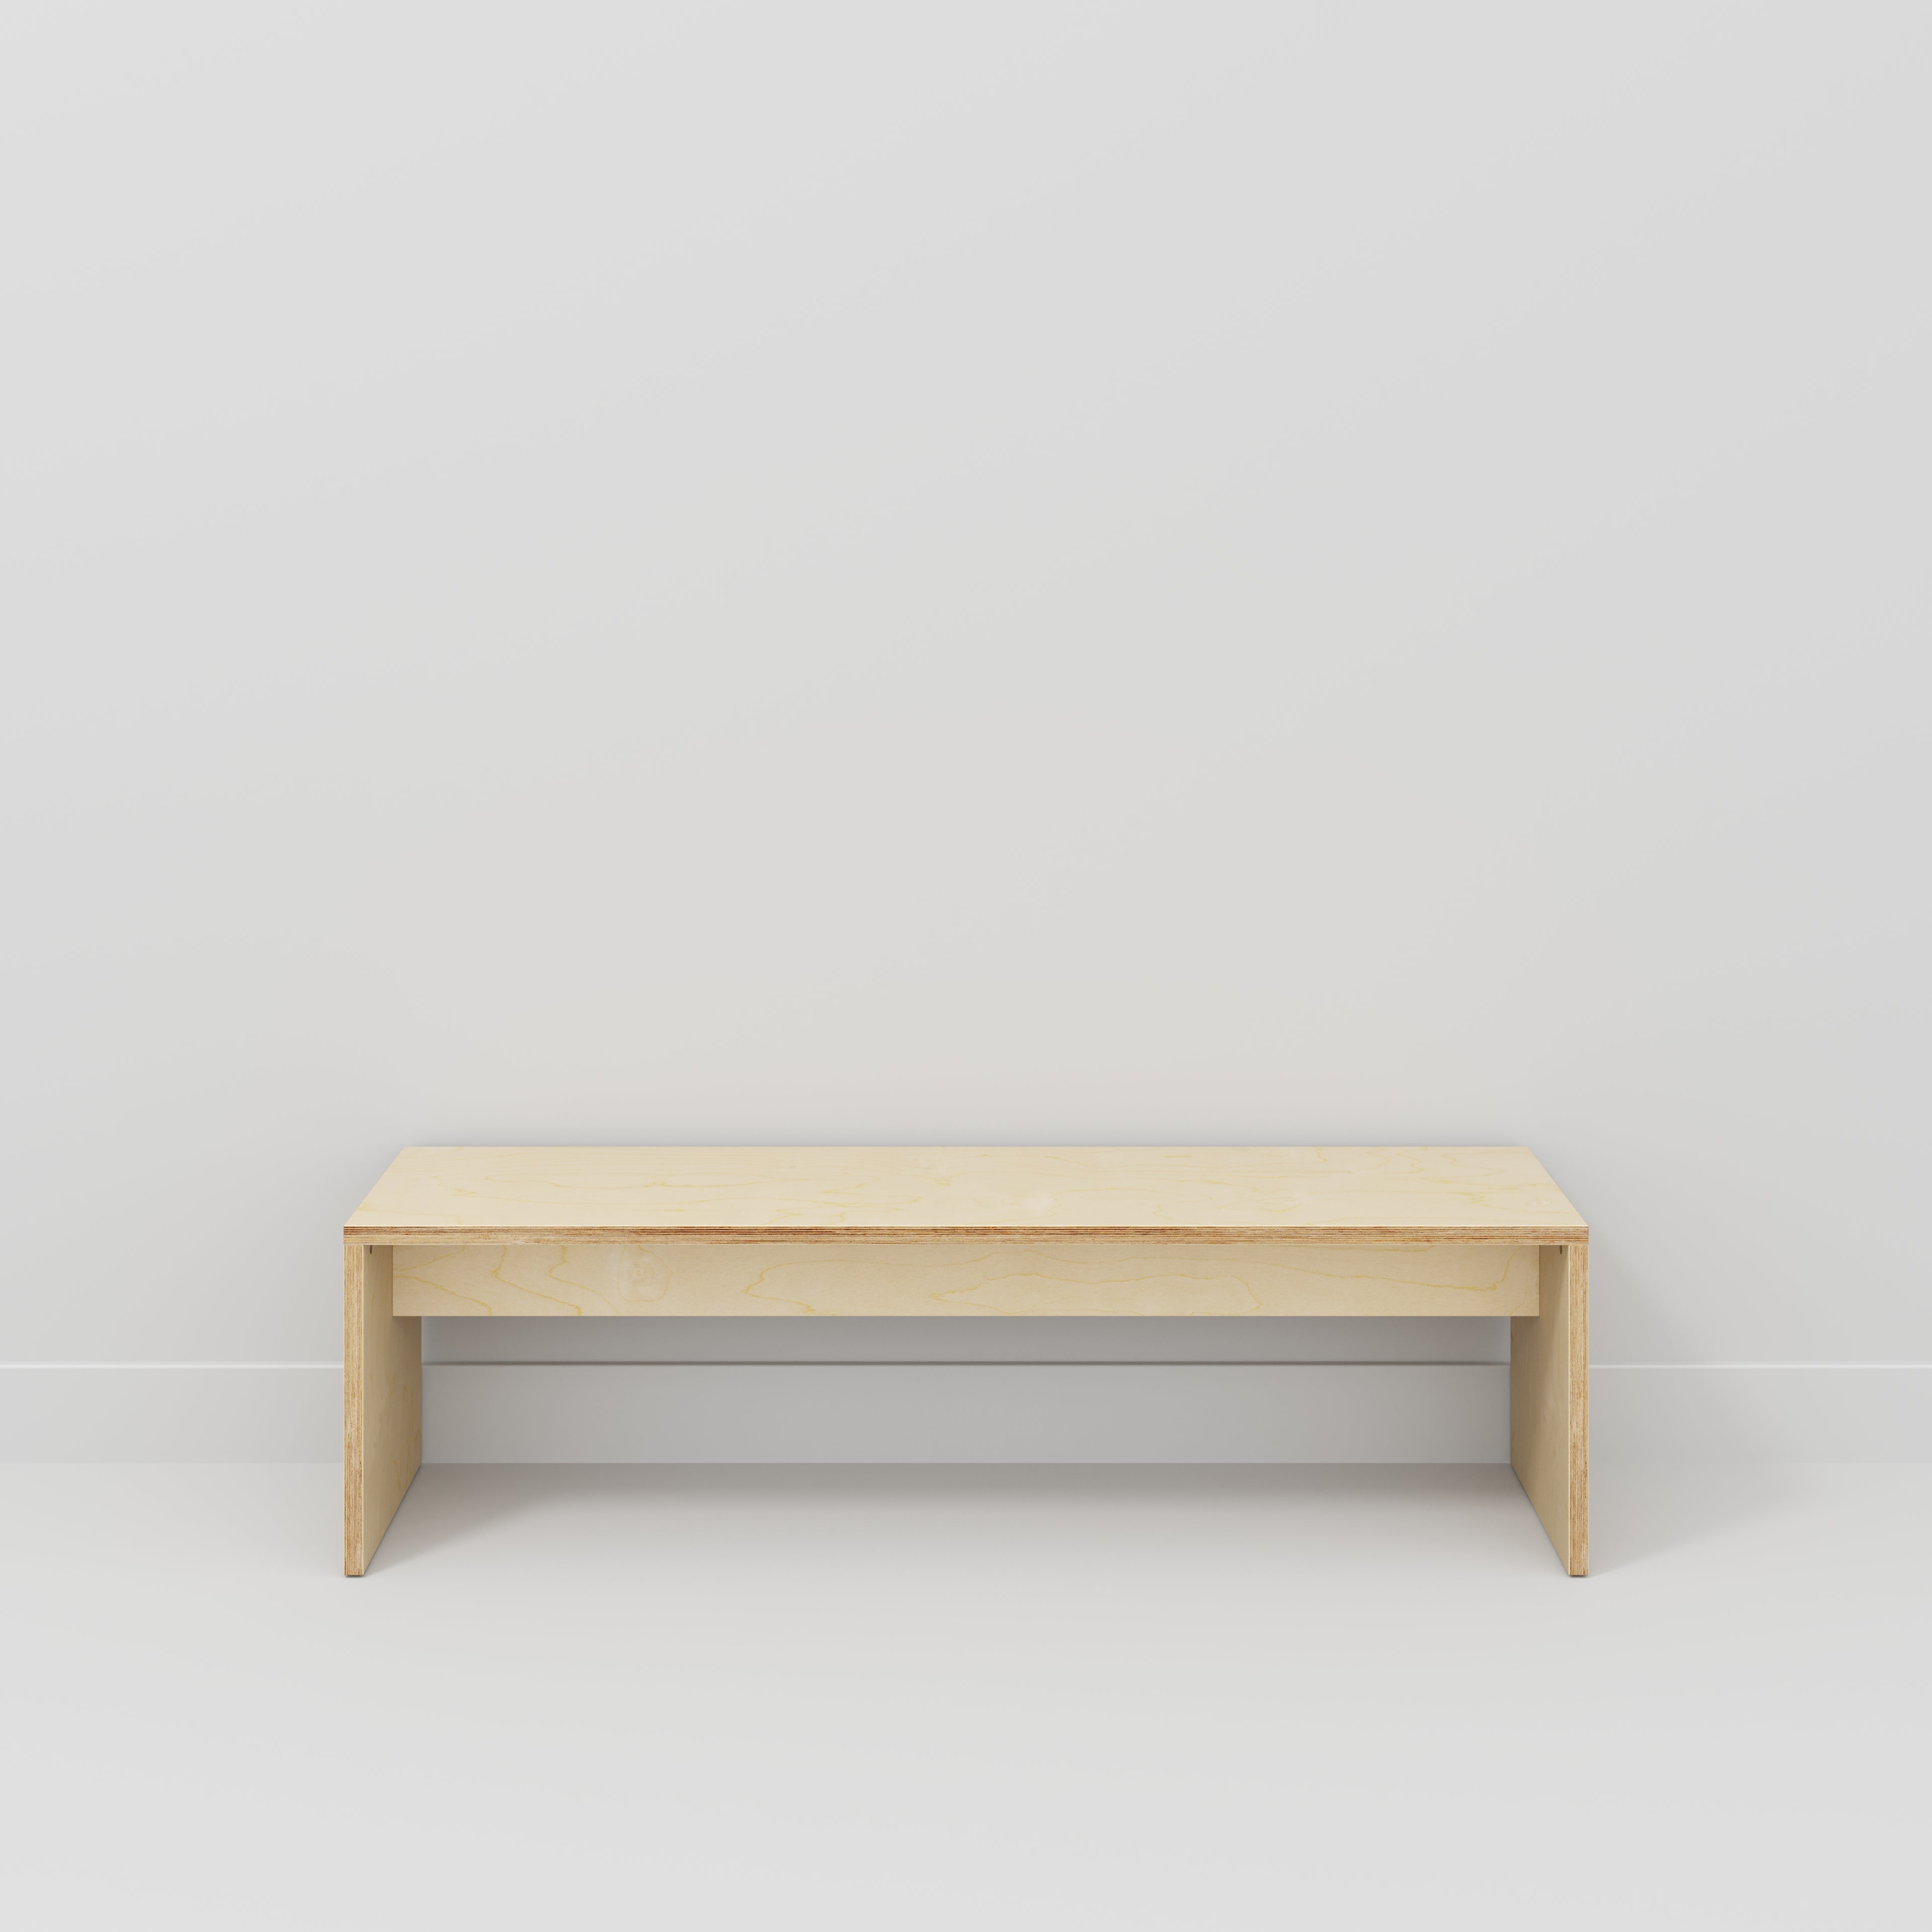 Bench Seat with Solid Sides - Plywood Birch - 1600(w) x 400(d)